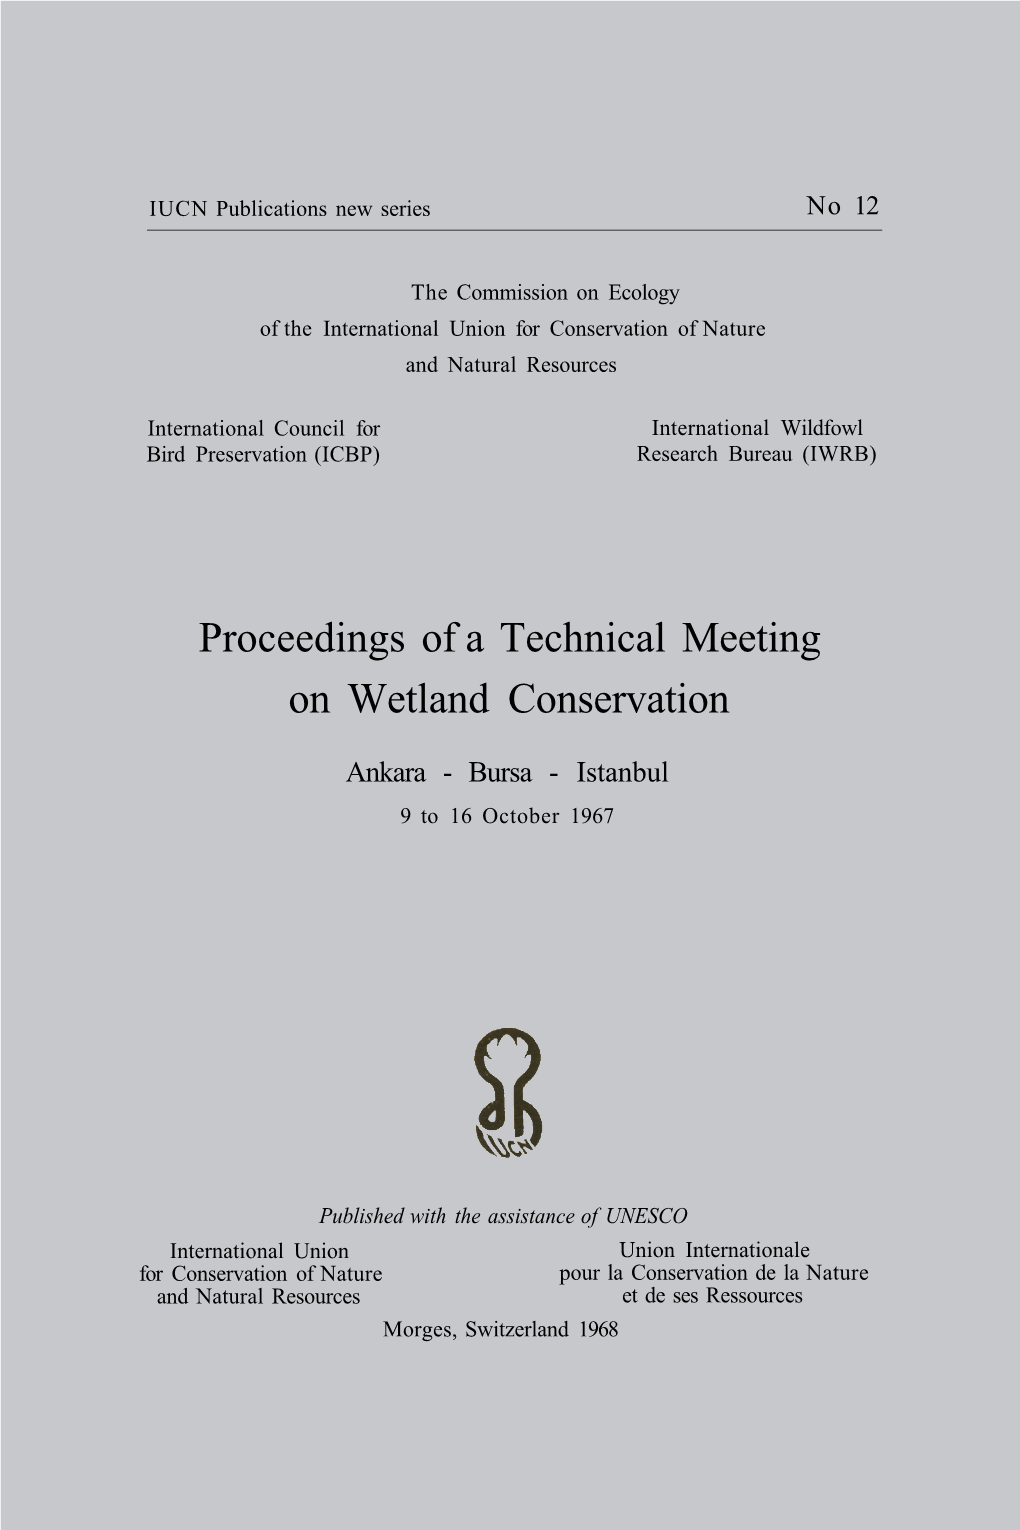 Proceedings of a Technical Meeting on Wetland Conservation